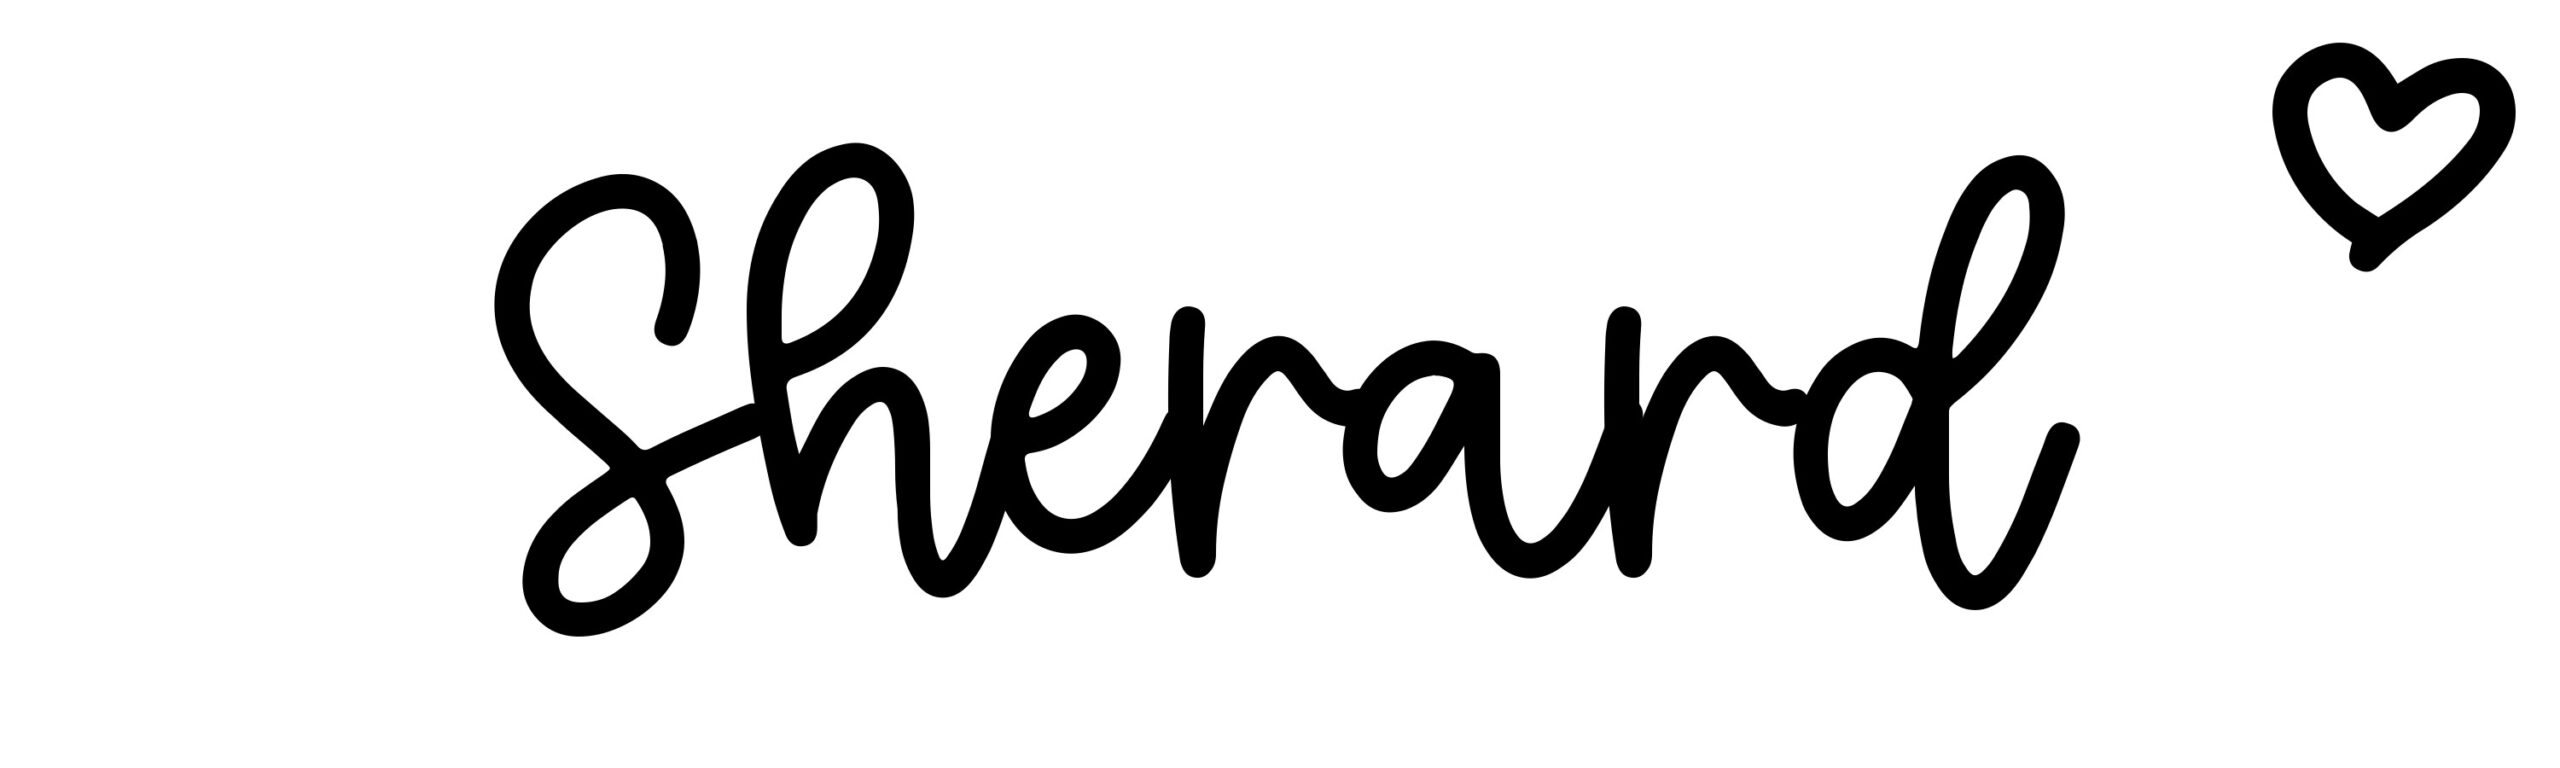 Sherard - Name meaning, origin, variations and more